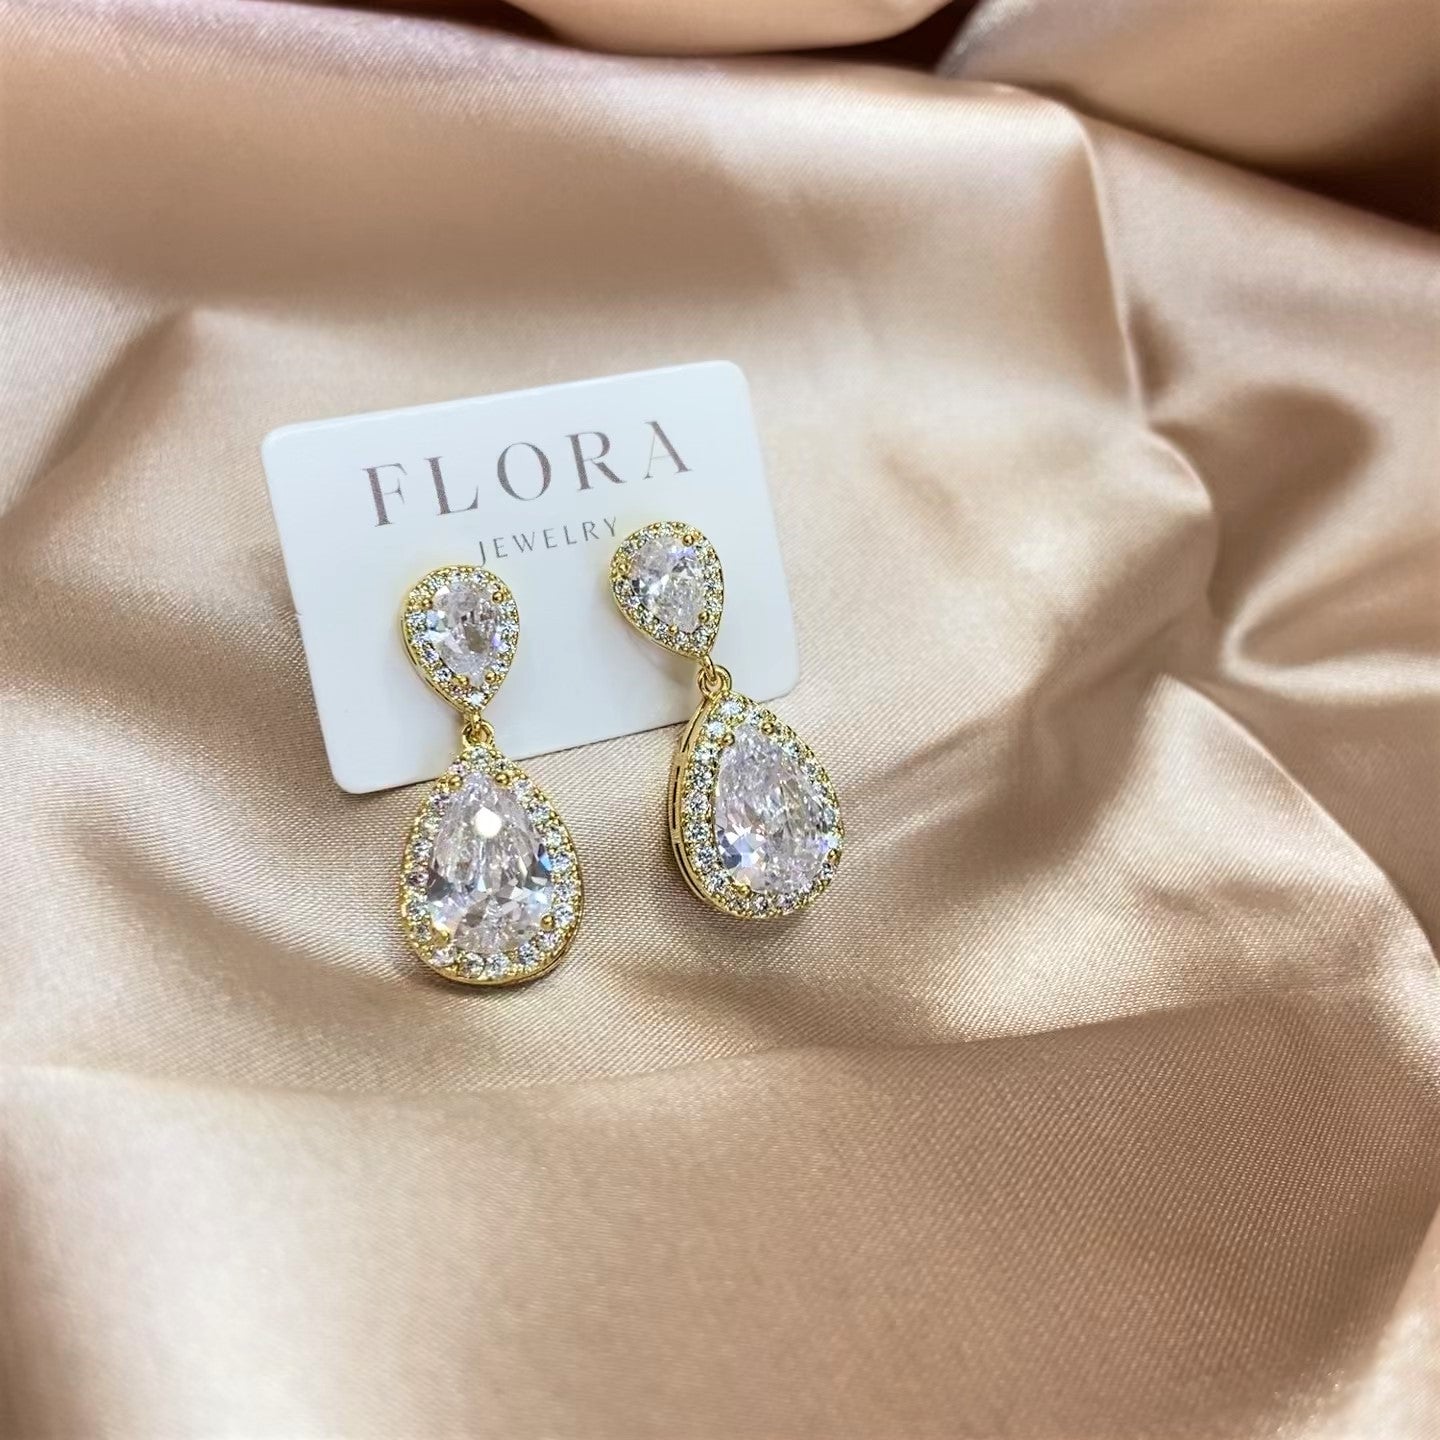 14k gold earrings with crystals for wedding guest